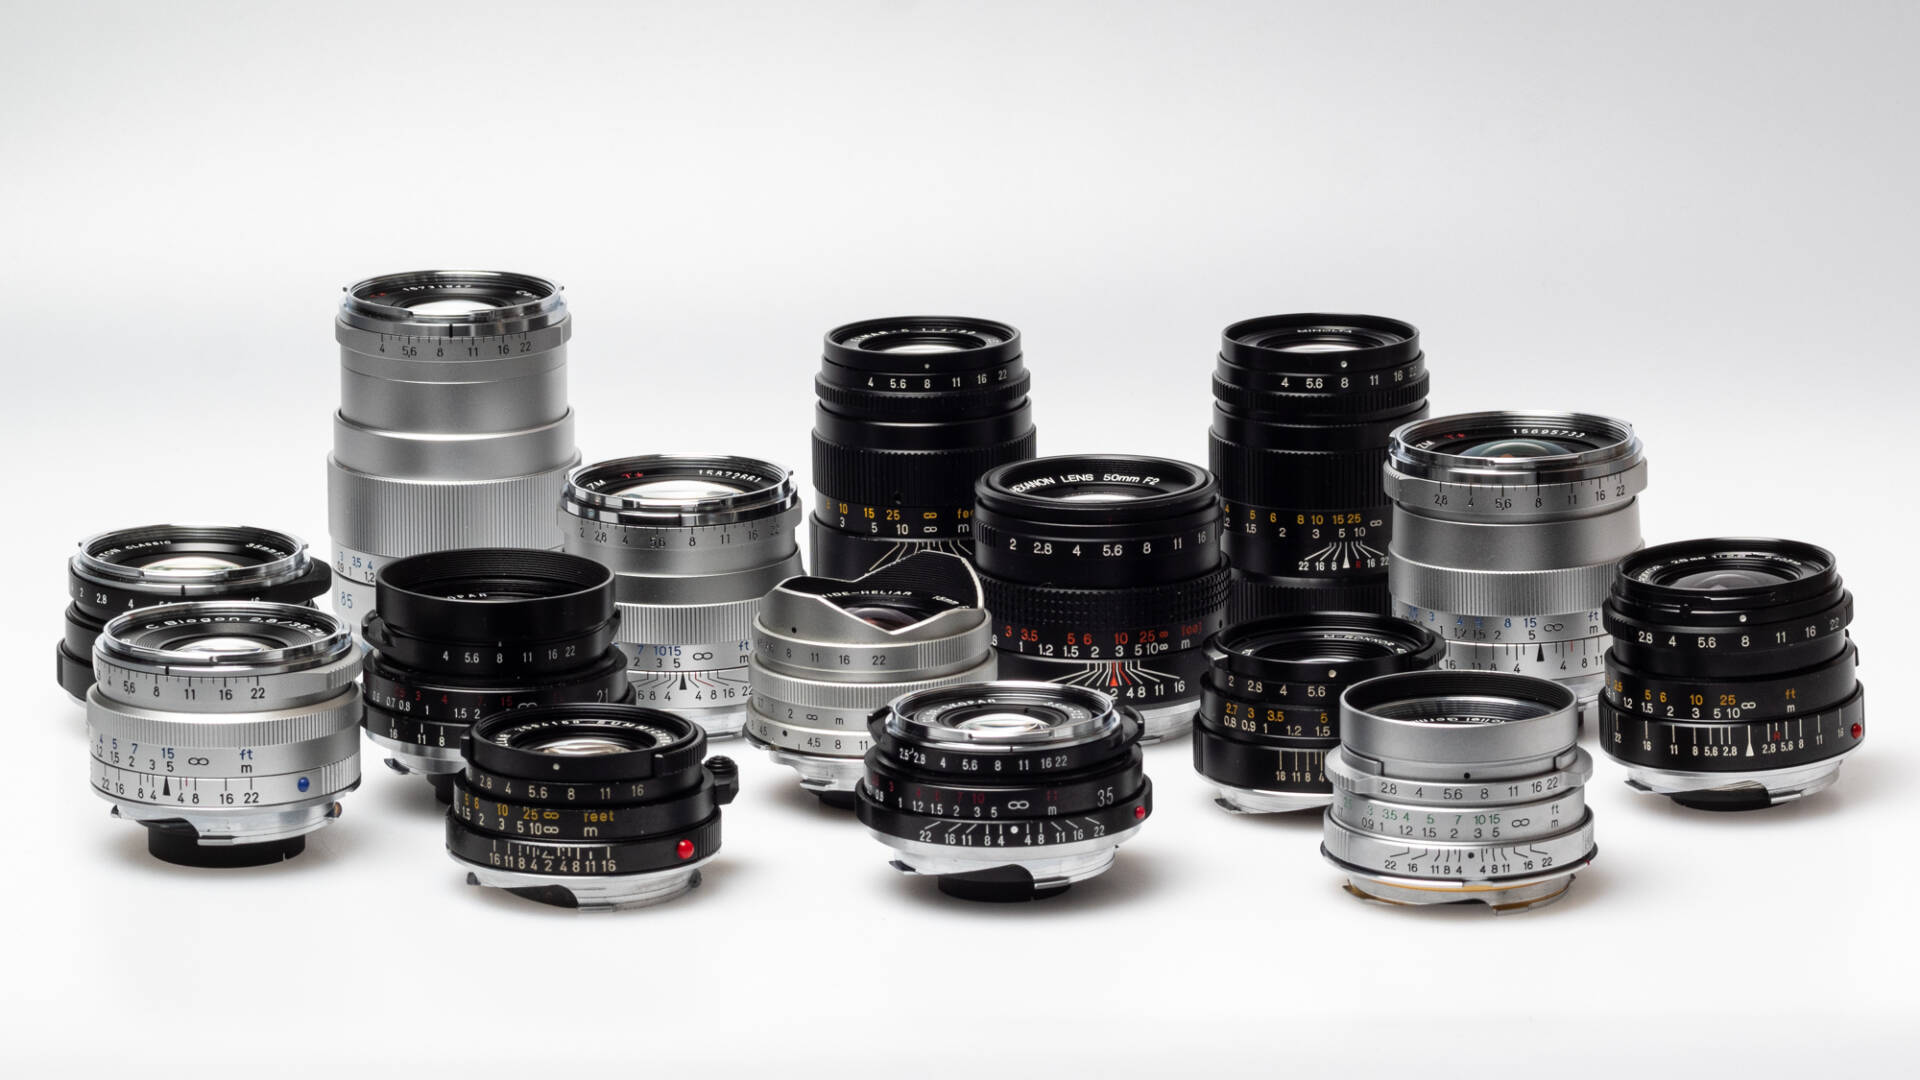 Take your pick: One of the best things about the Leica M system is the wide range of lenses that are available new or used, some very affordable and some others just luxurious. 